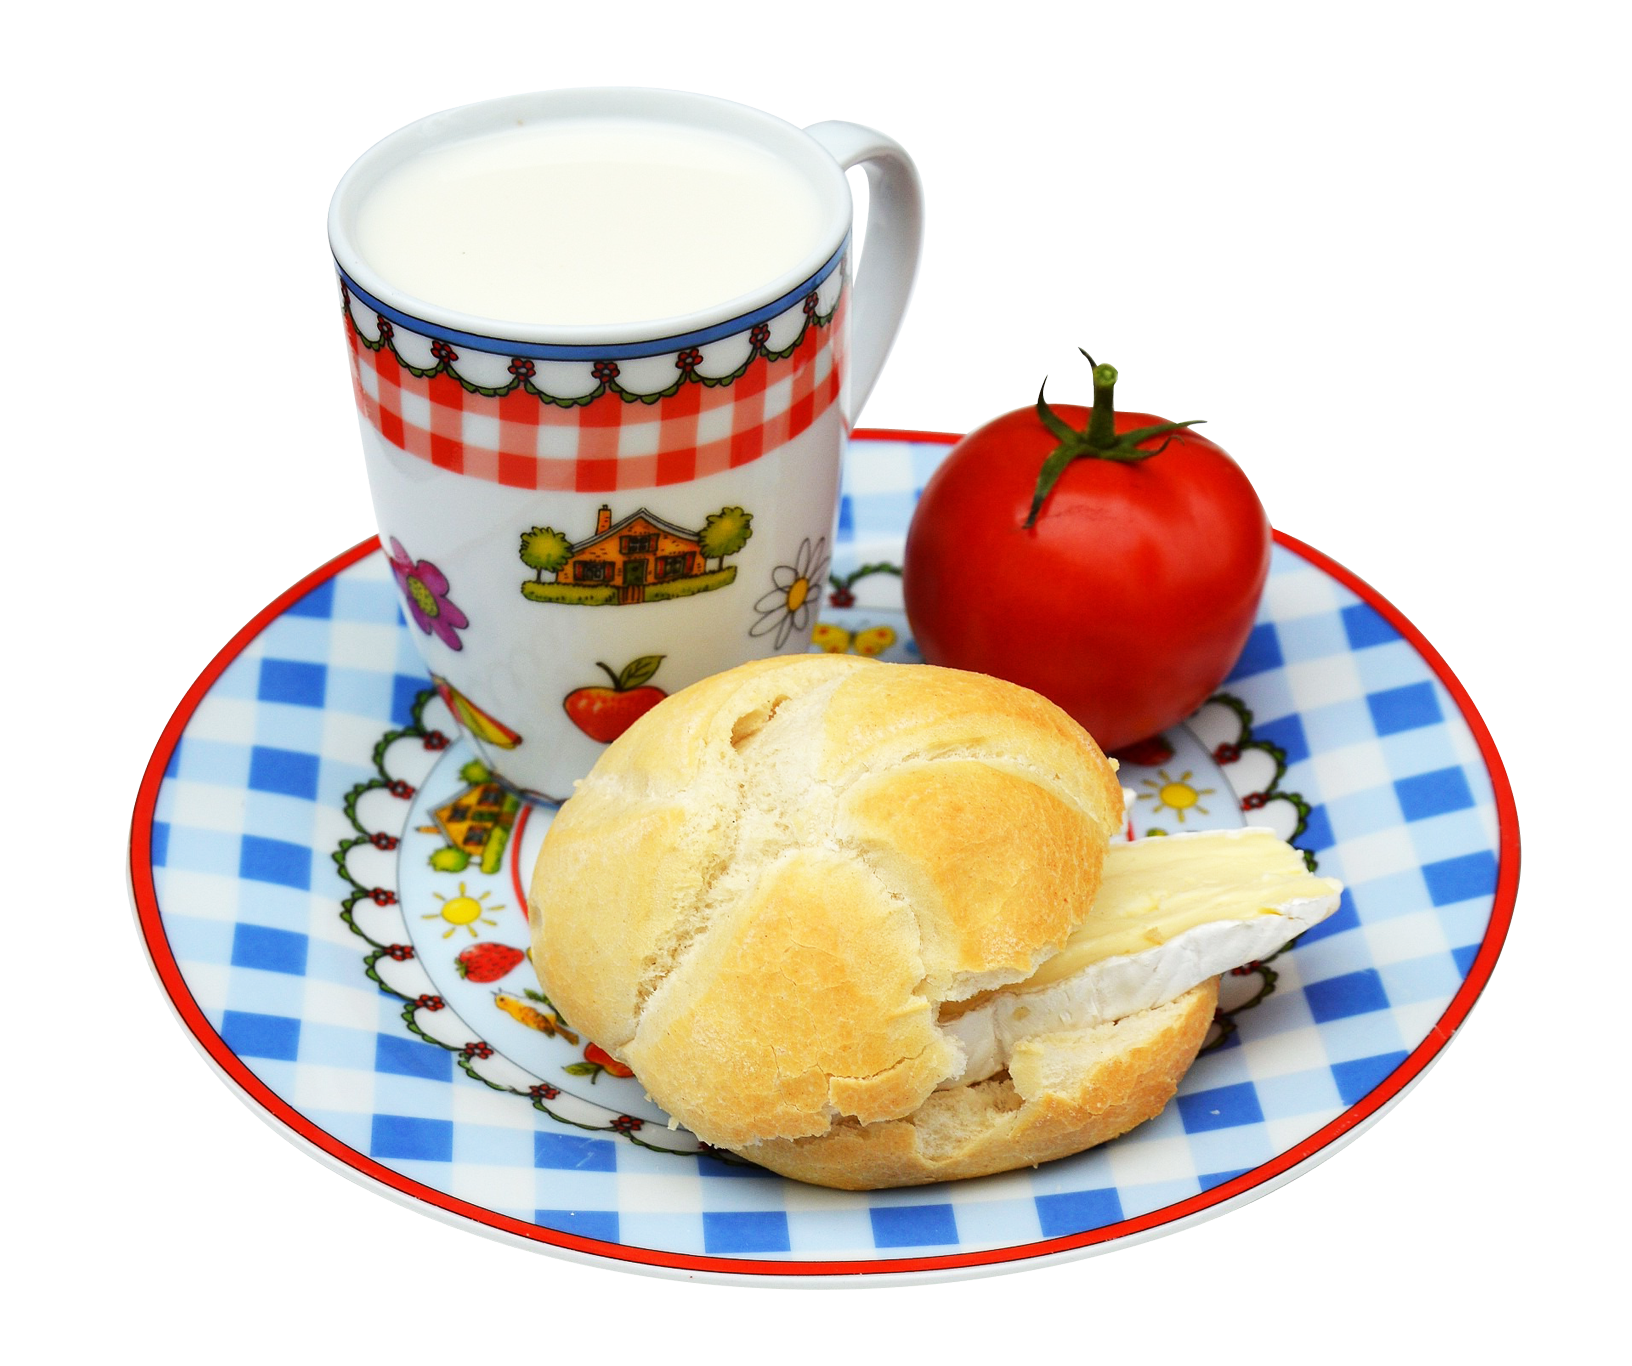 A Plate With A Tomato And A Bread Roll And A Cup Of Milk